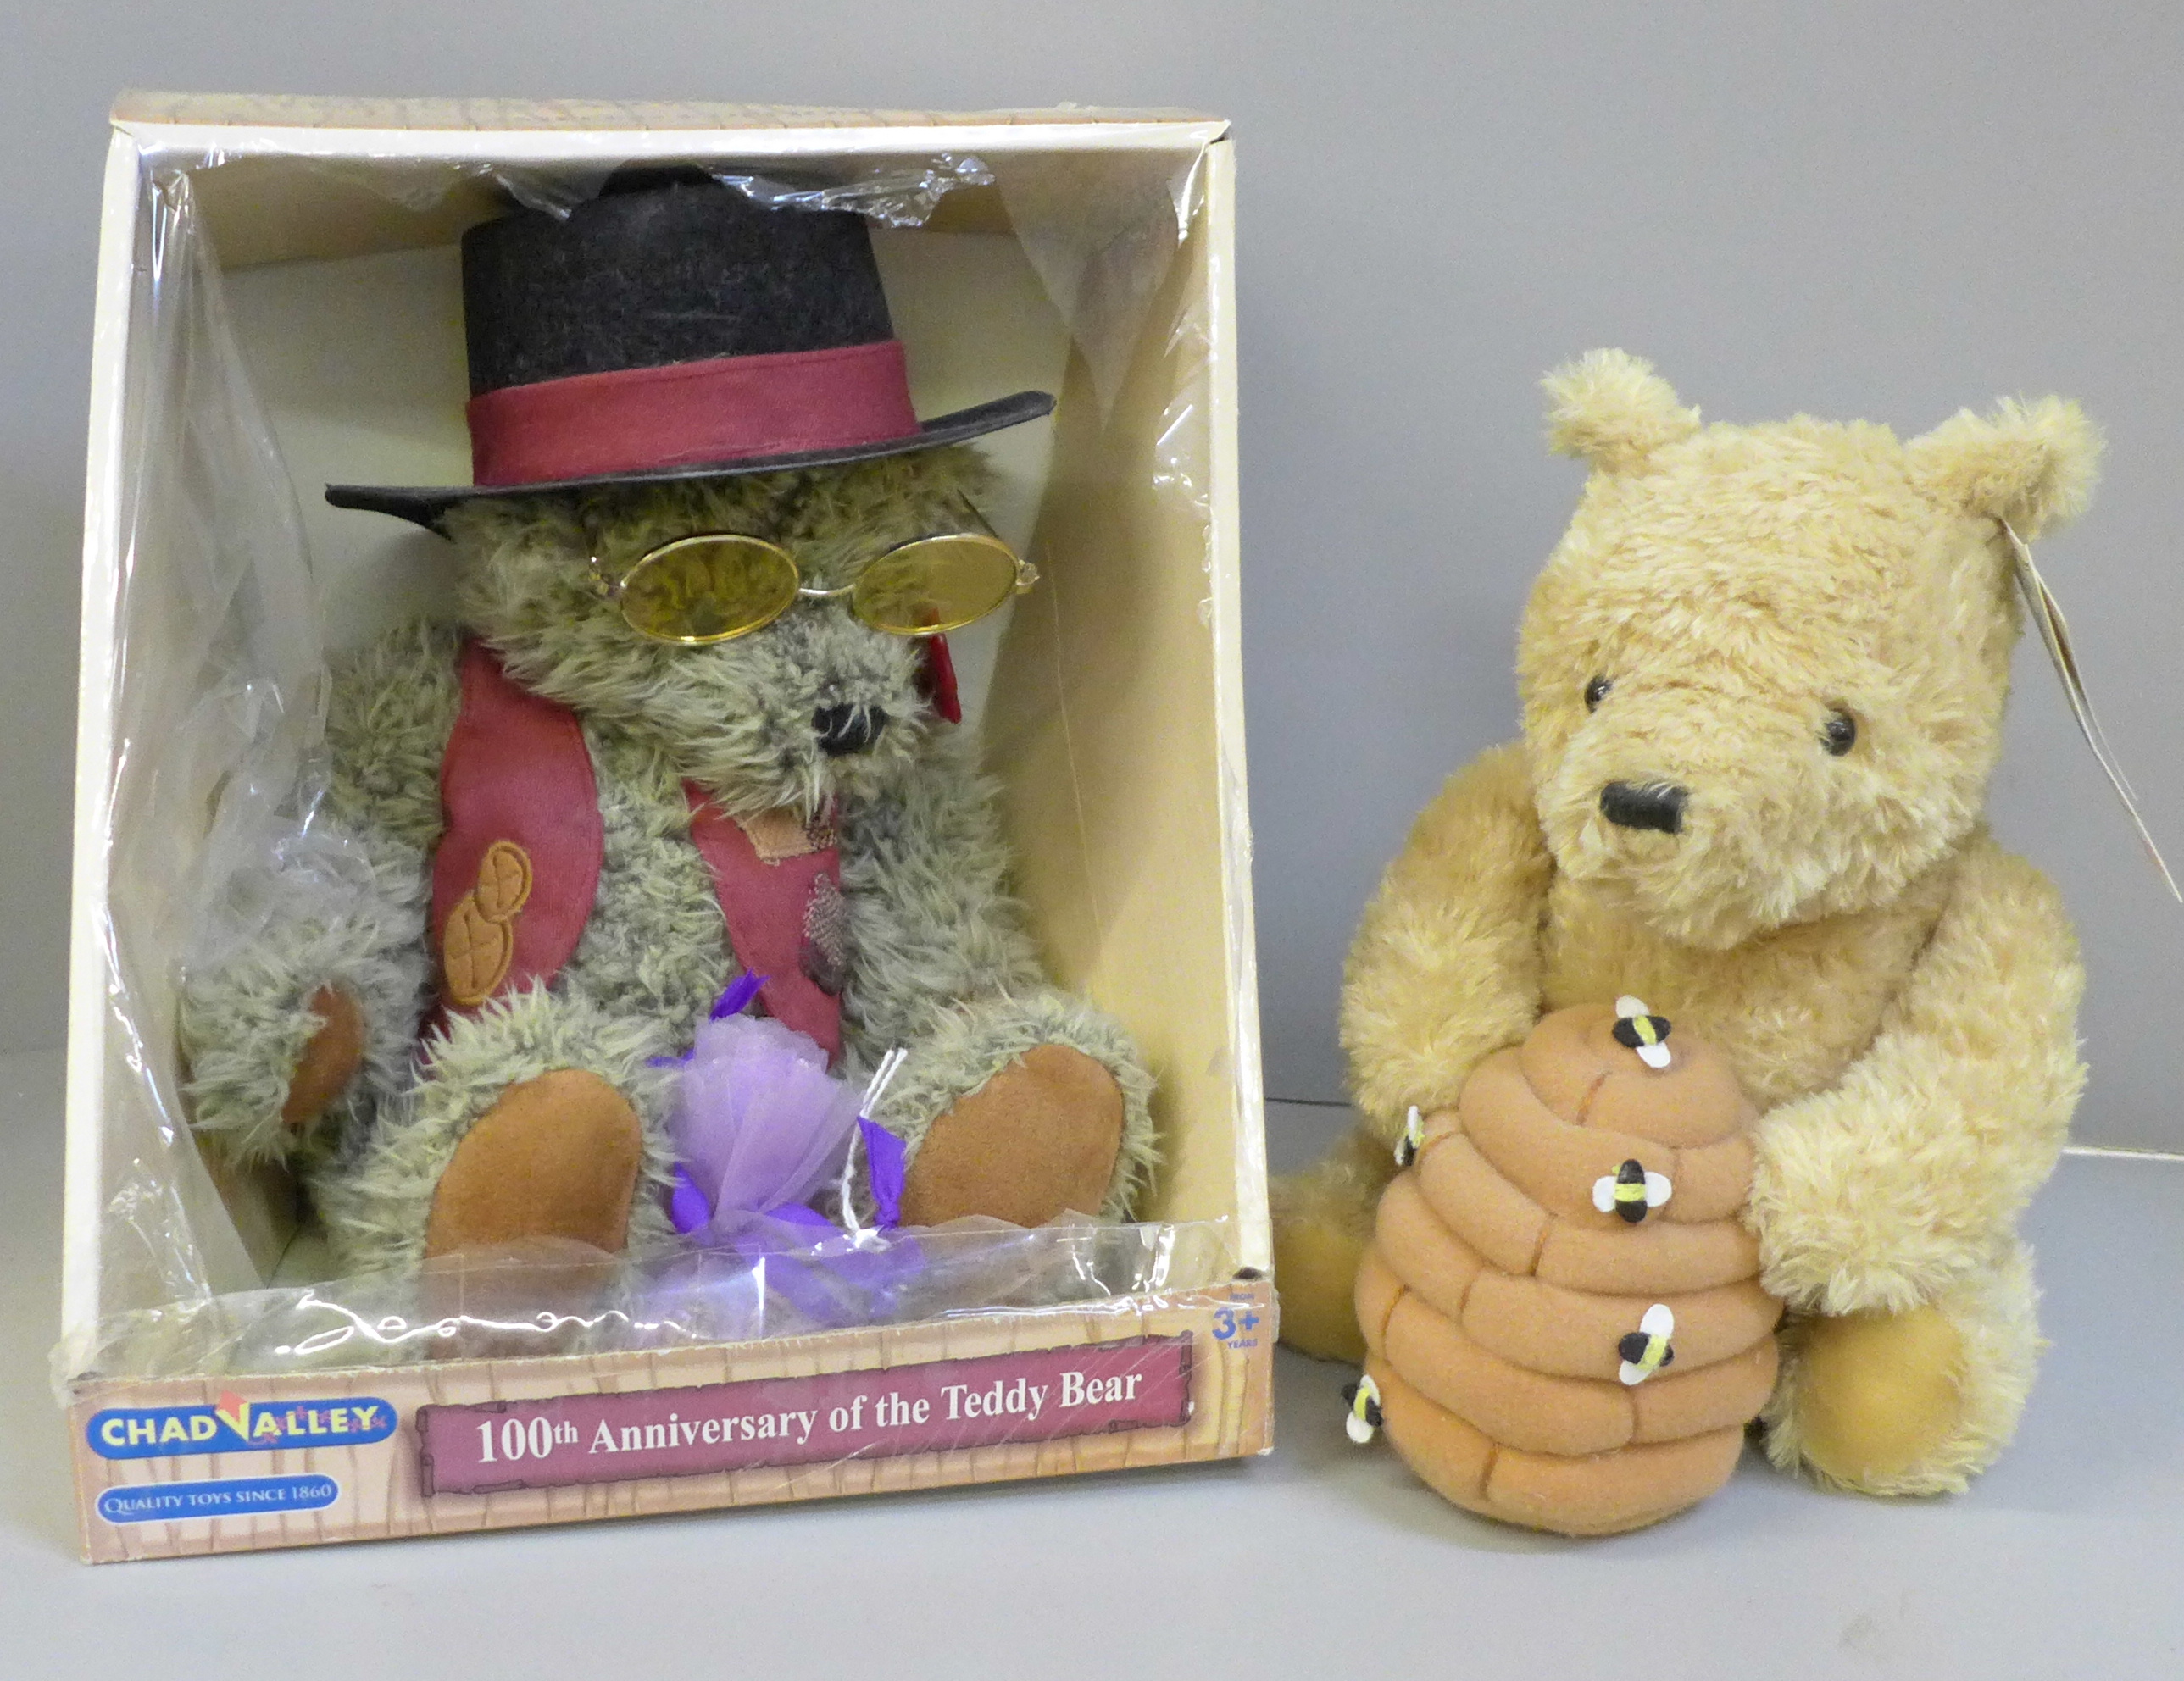 A musical Winnie the Pooh bear and a Chad Valley 100th Anniversary of the Teddy Bear bear in box